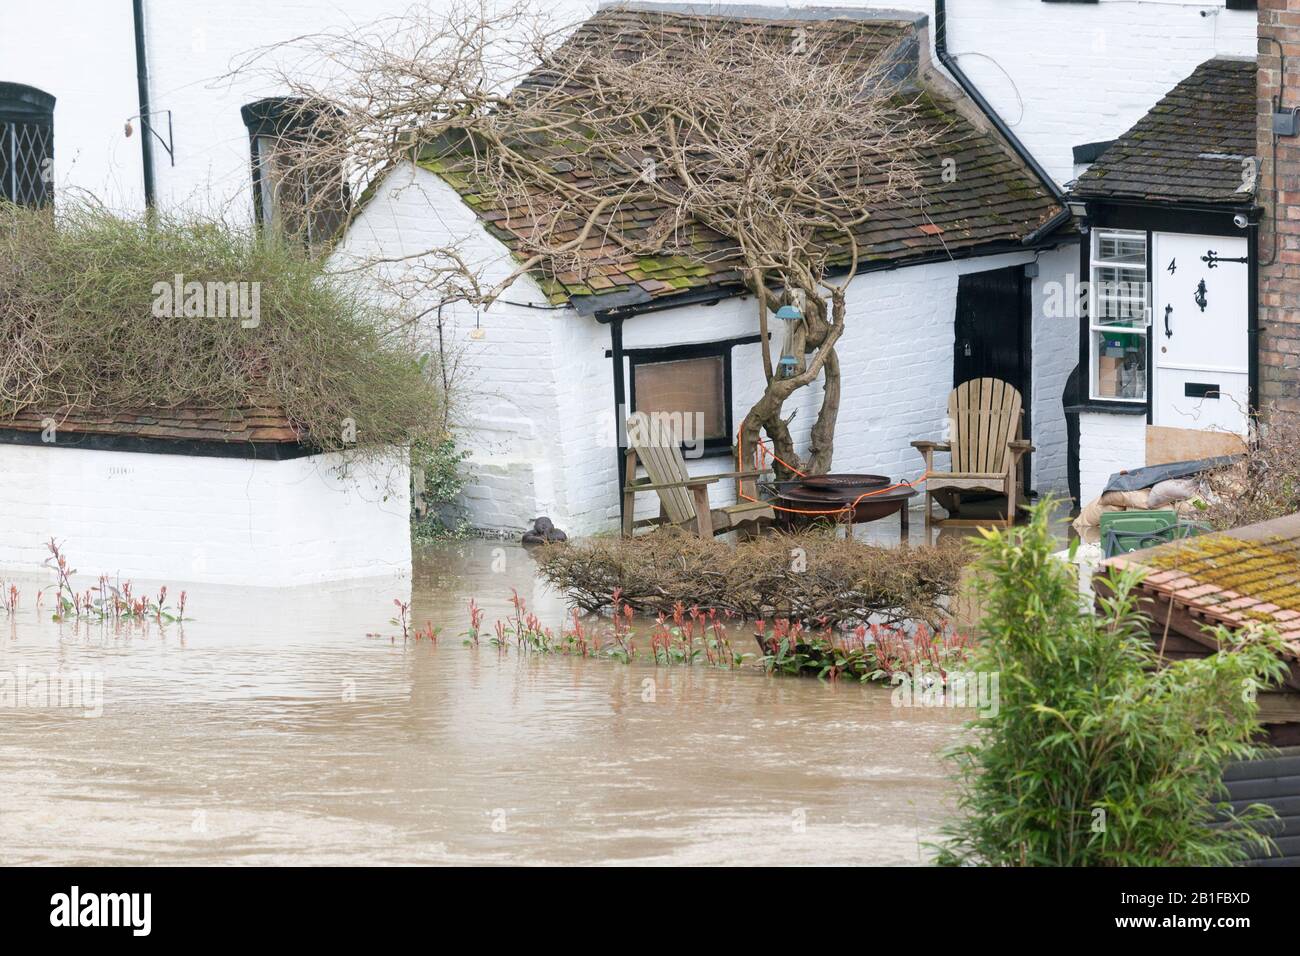 Ironbridge, Shropshire, UK. 25th Feb, 2020. Severe flood warning in place on the River Severn at Ironbridge, Shropshire. A house on the riverside is flooded. Credit: Peter Lopeman/Alamy Live News Stock Photo